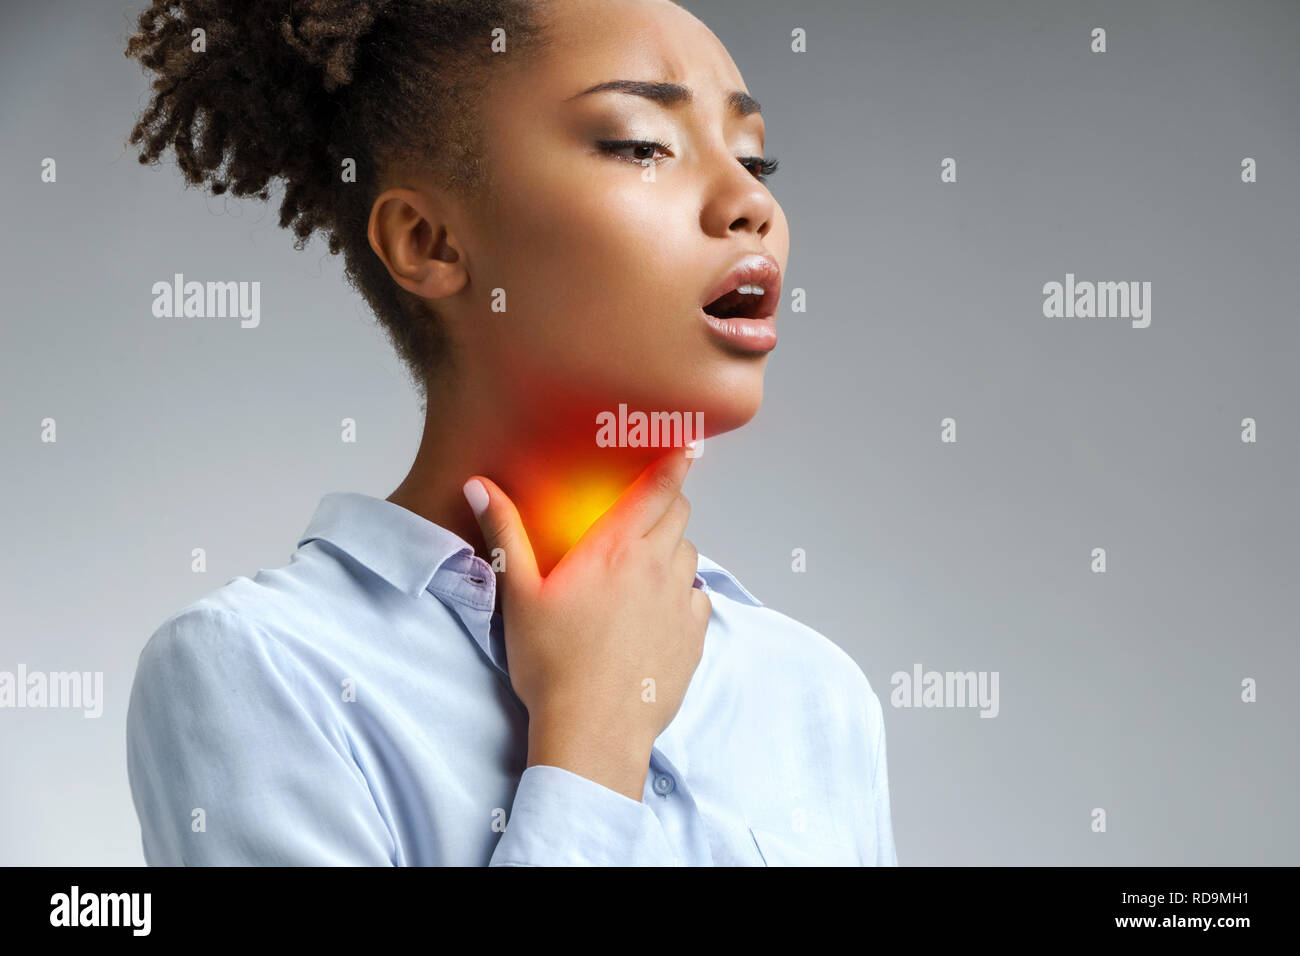 Throat pain. Woman holding her inflamed throat. Photo of african american woman in blue shirt on gray background. Medical concept Stock Photo